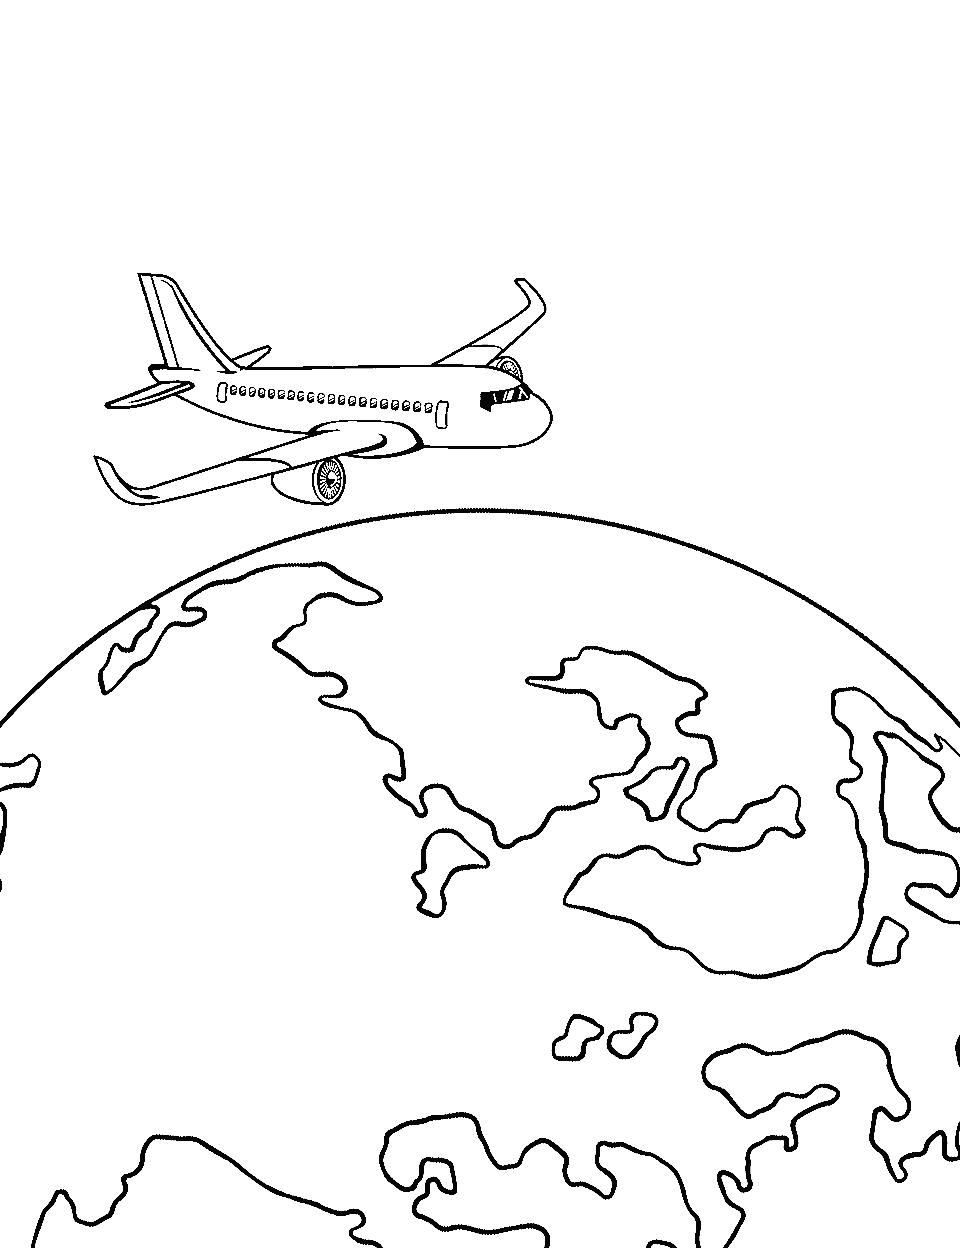 Around the World Airplane Coloring Page - An airplane circling a simple representation of the Earth.